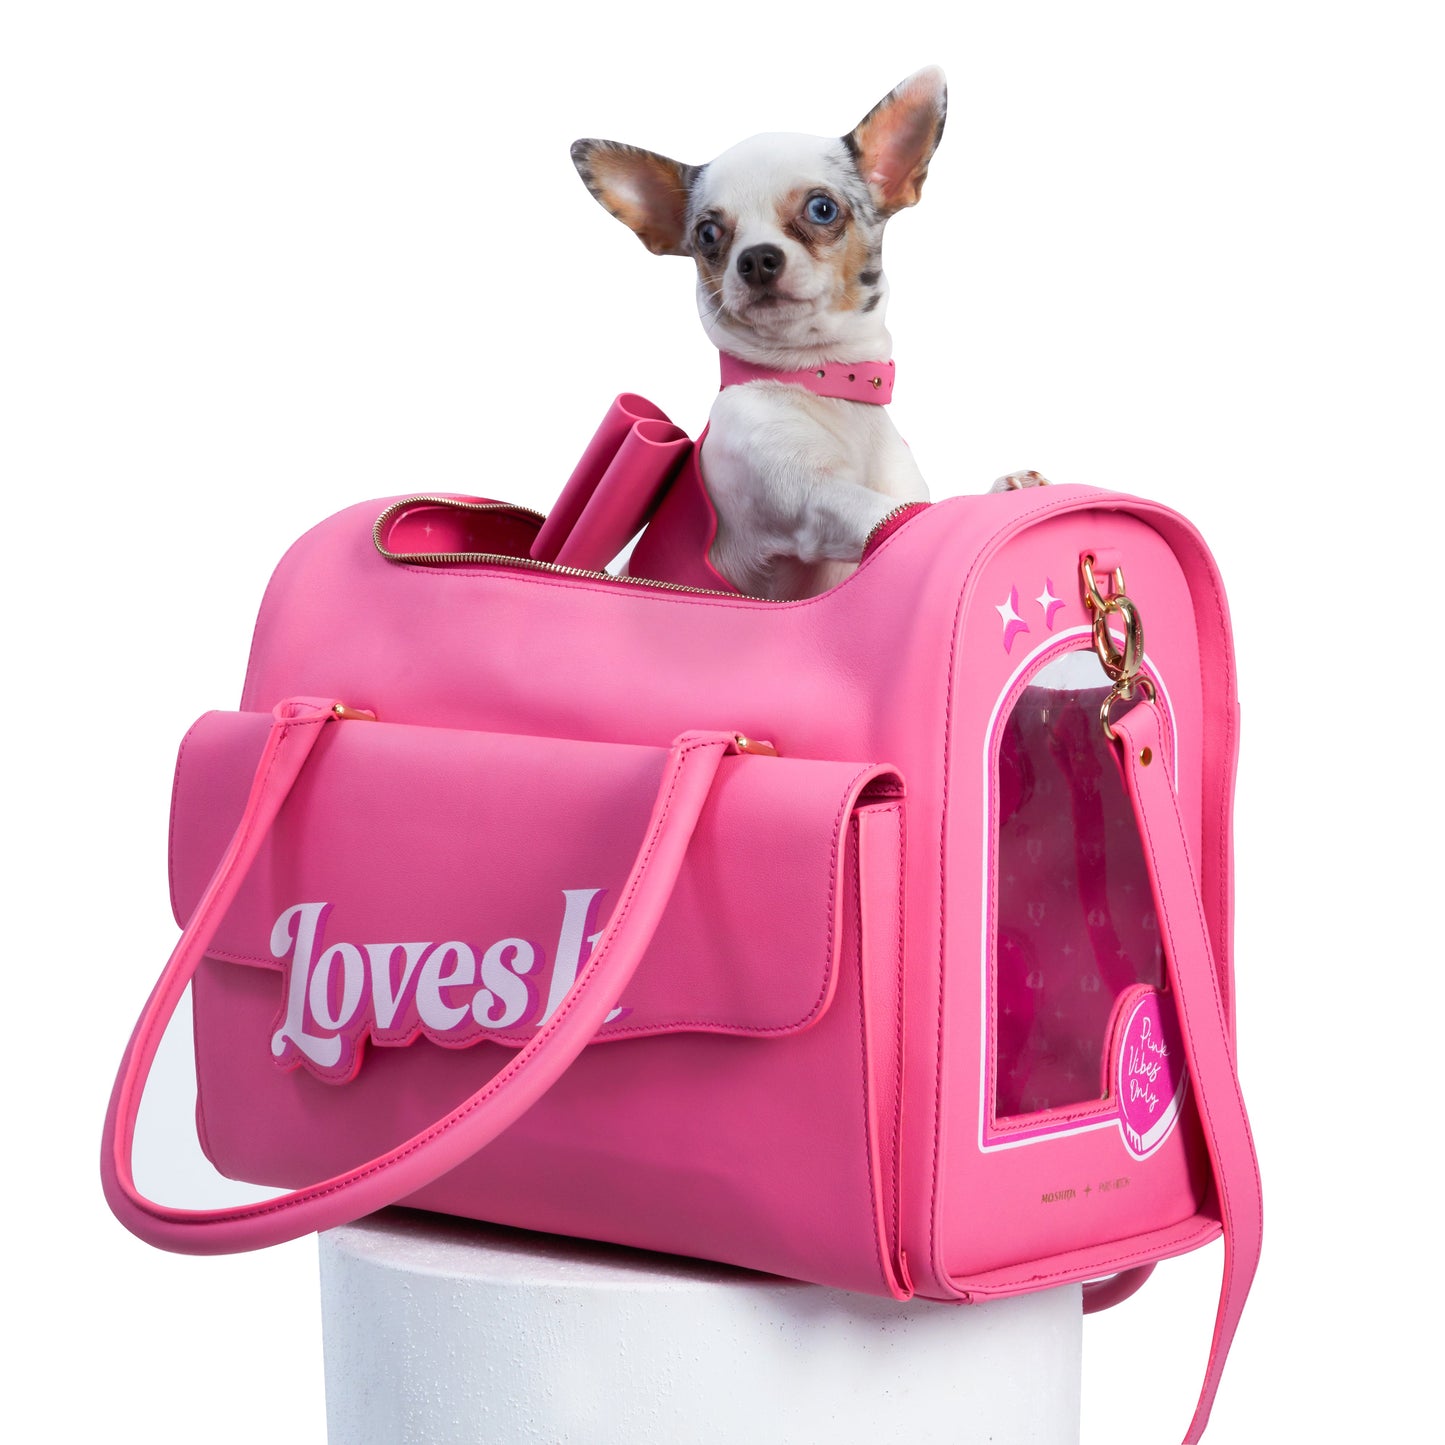 Loves It Dog Carrier by Moshiqa